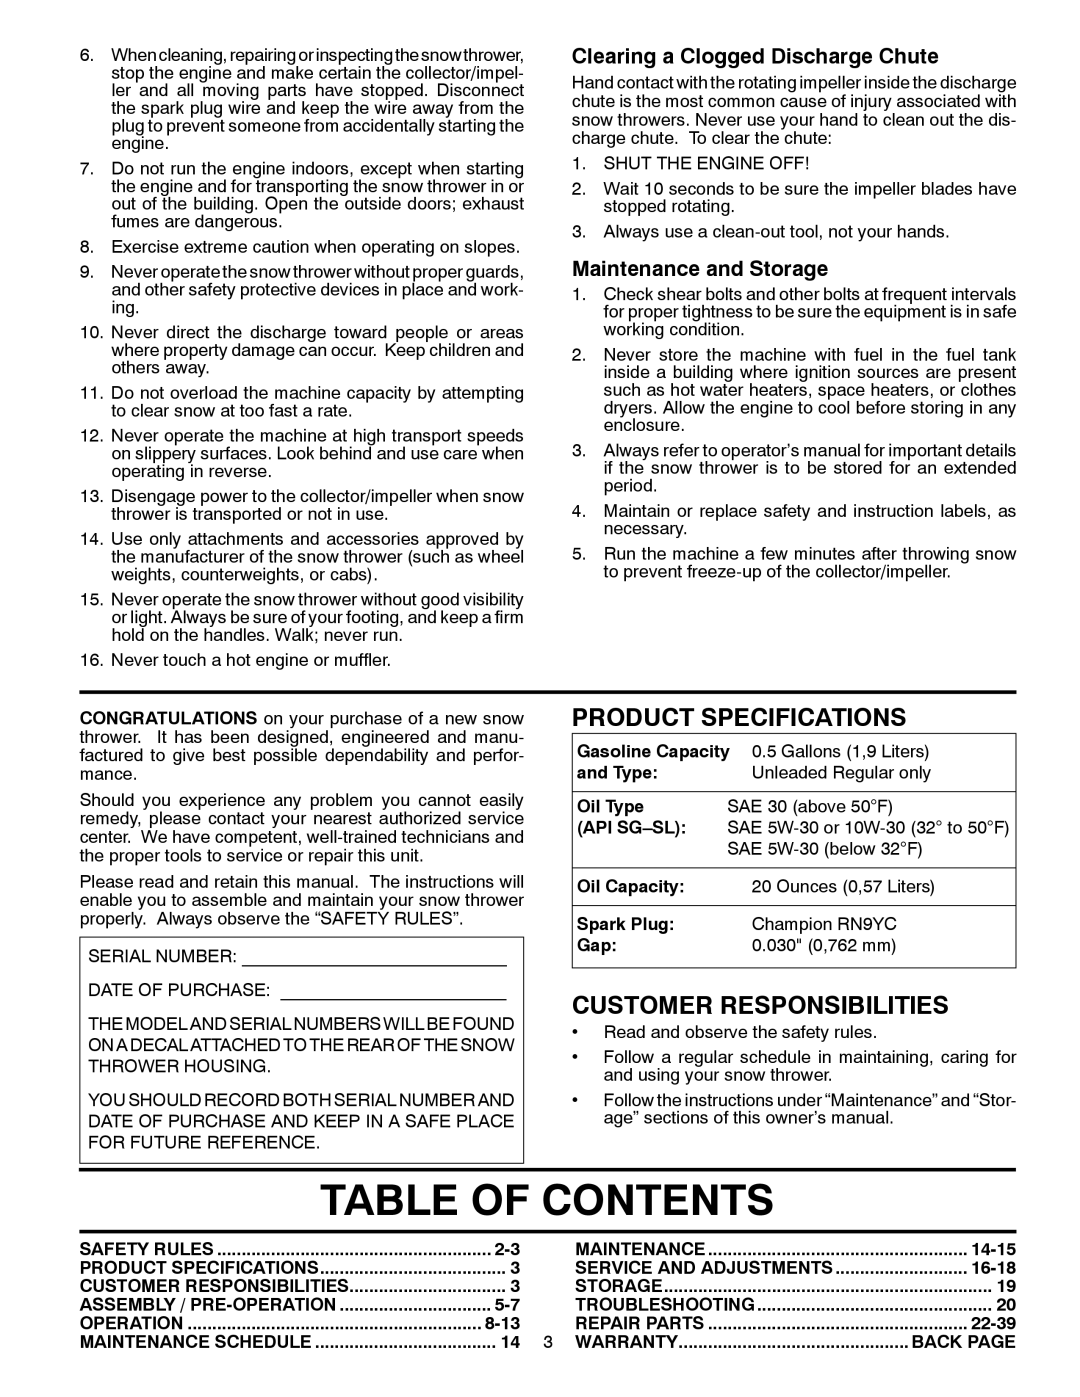 Poulan 429890 Table Of Contents, Product Specifications, Customer Responsibilities, Clearing a Clogged Discharge Chute 